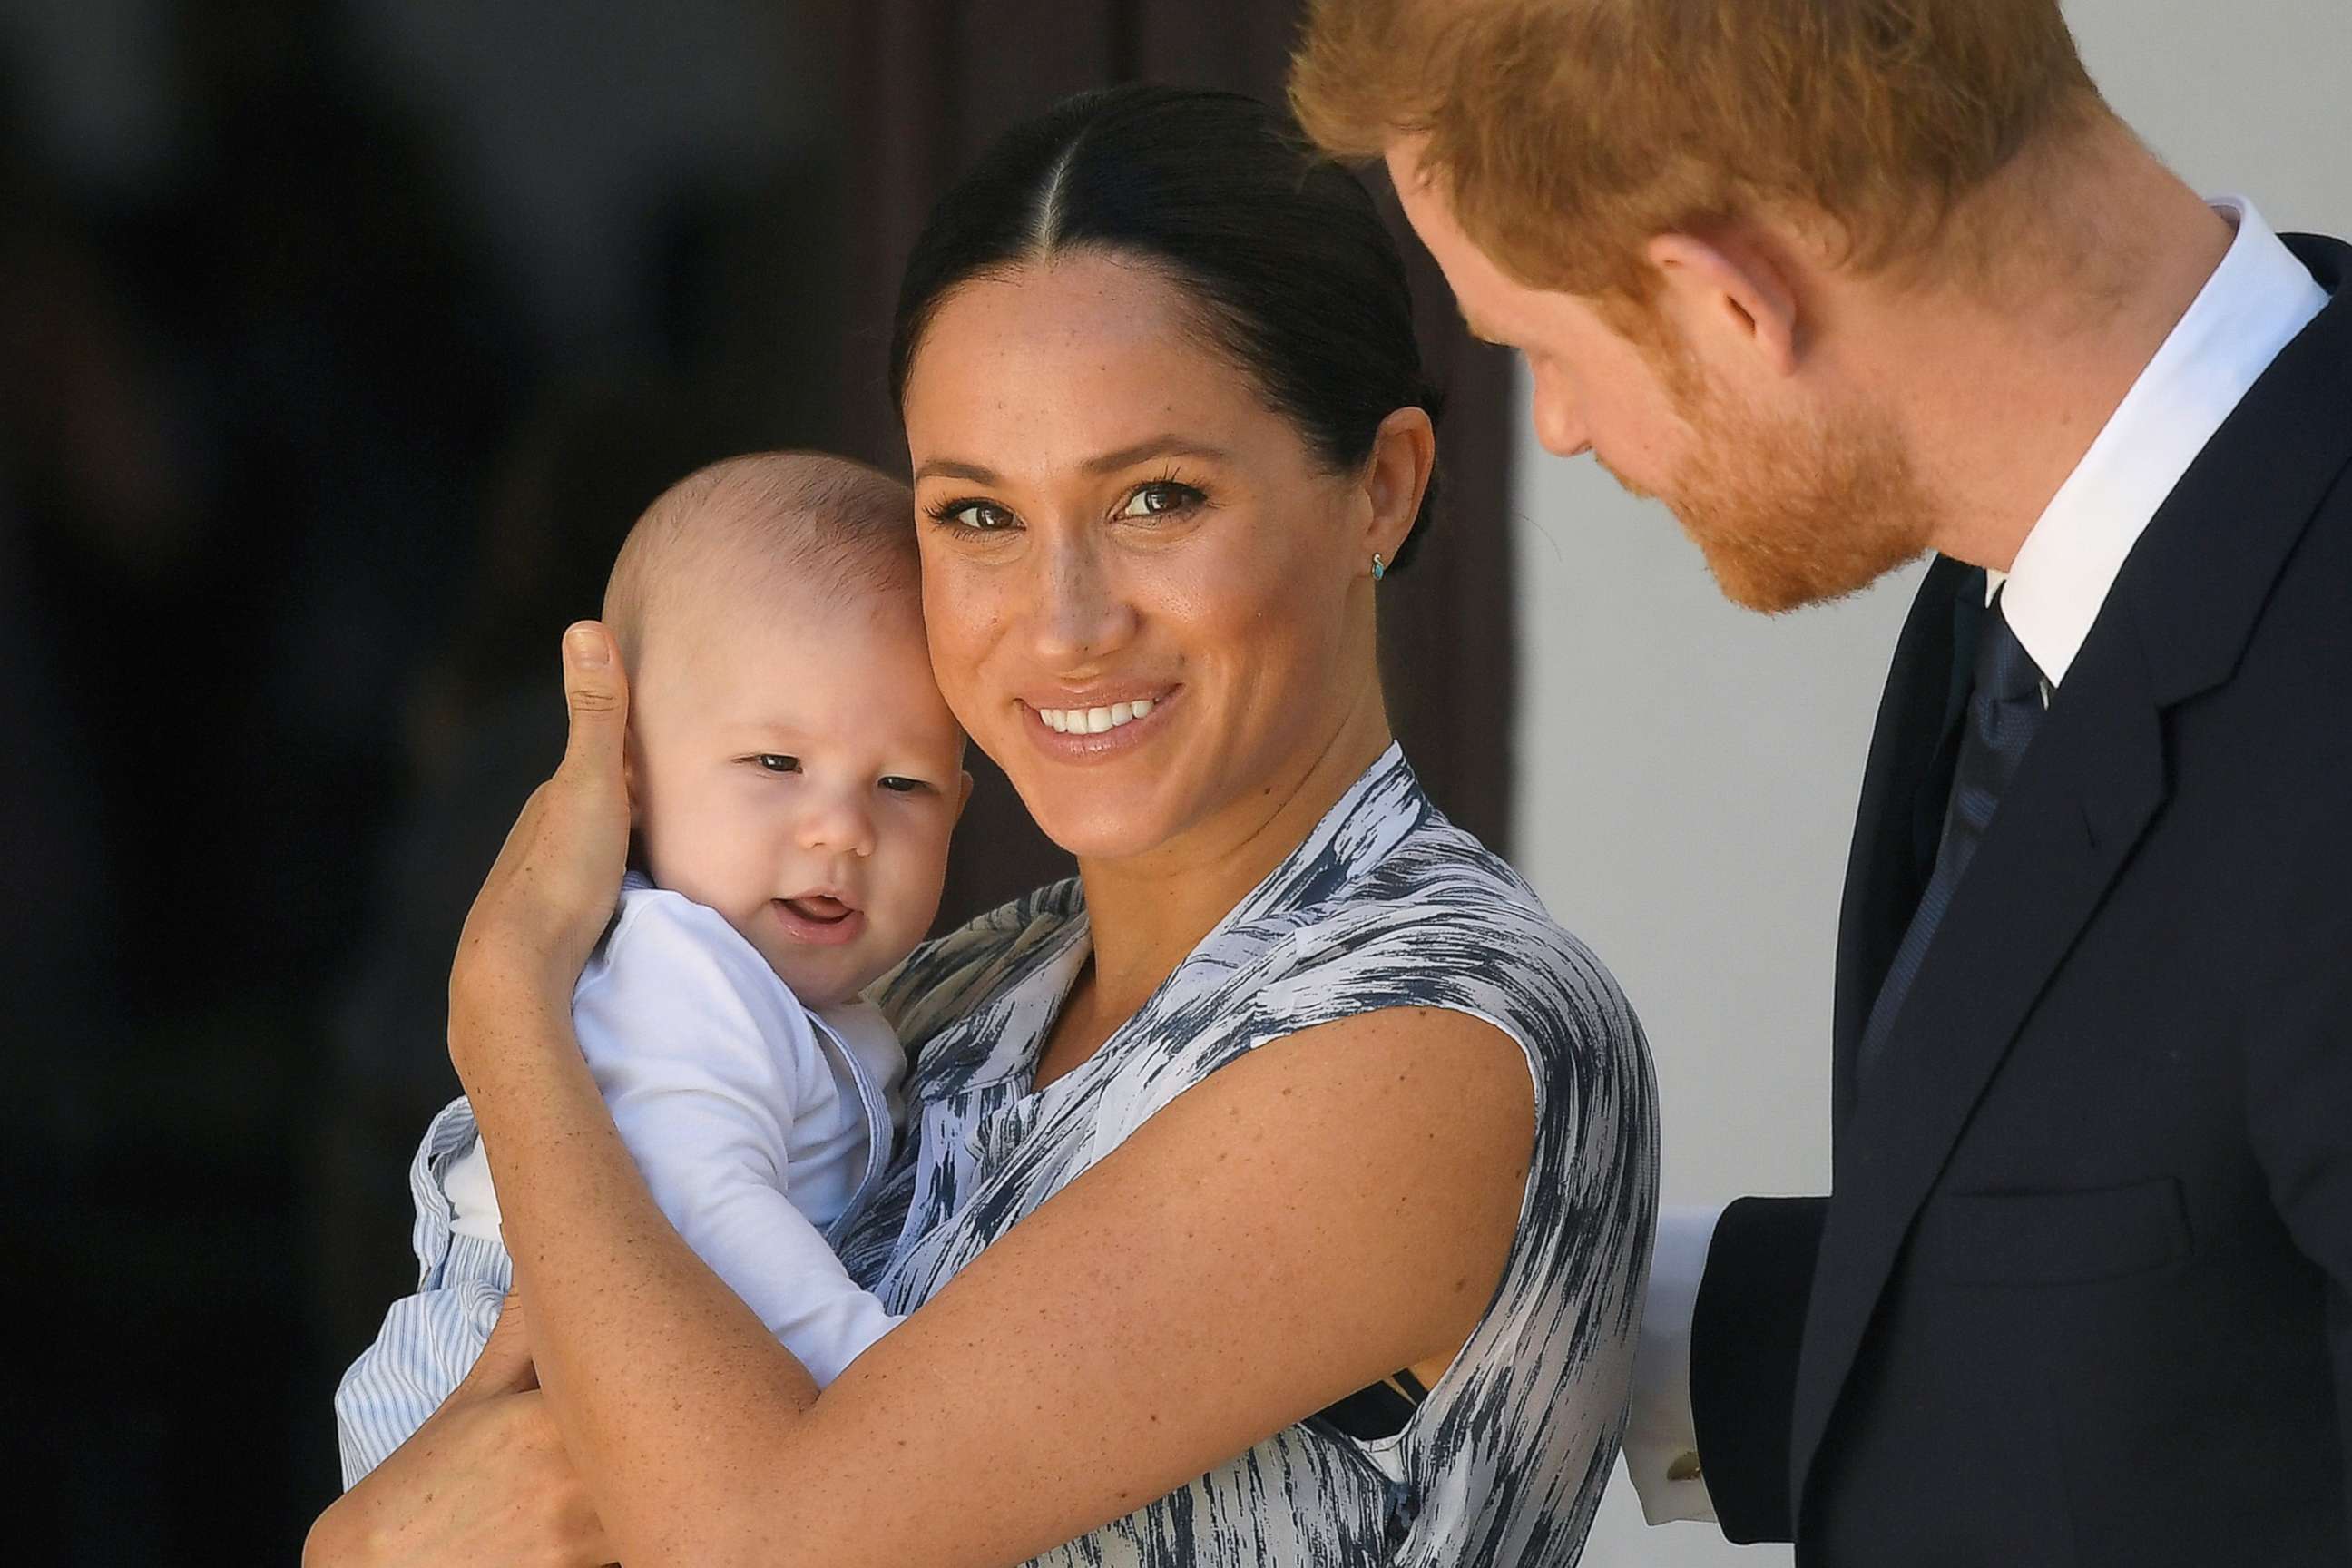 PHOTO: Prince Harry, Duke of Sussex and Meghan, Duchess of Sussex and their son Archie Mountbatten-Windsor at a meeting on Sept. 25, 2019 in Cape Town, South Africa.